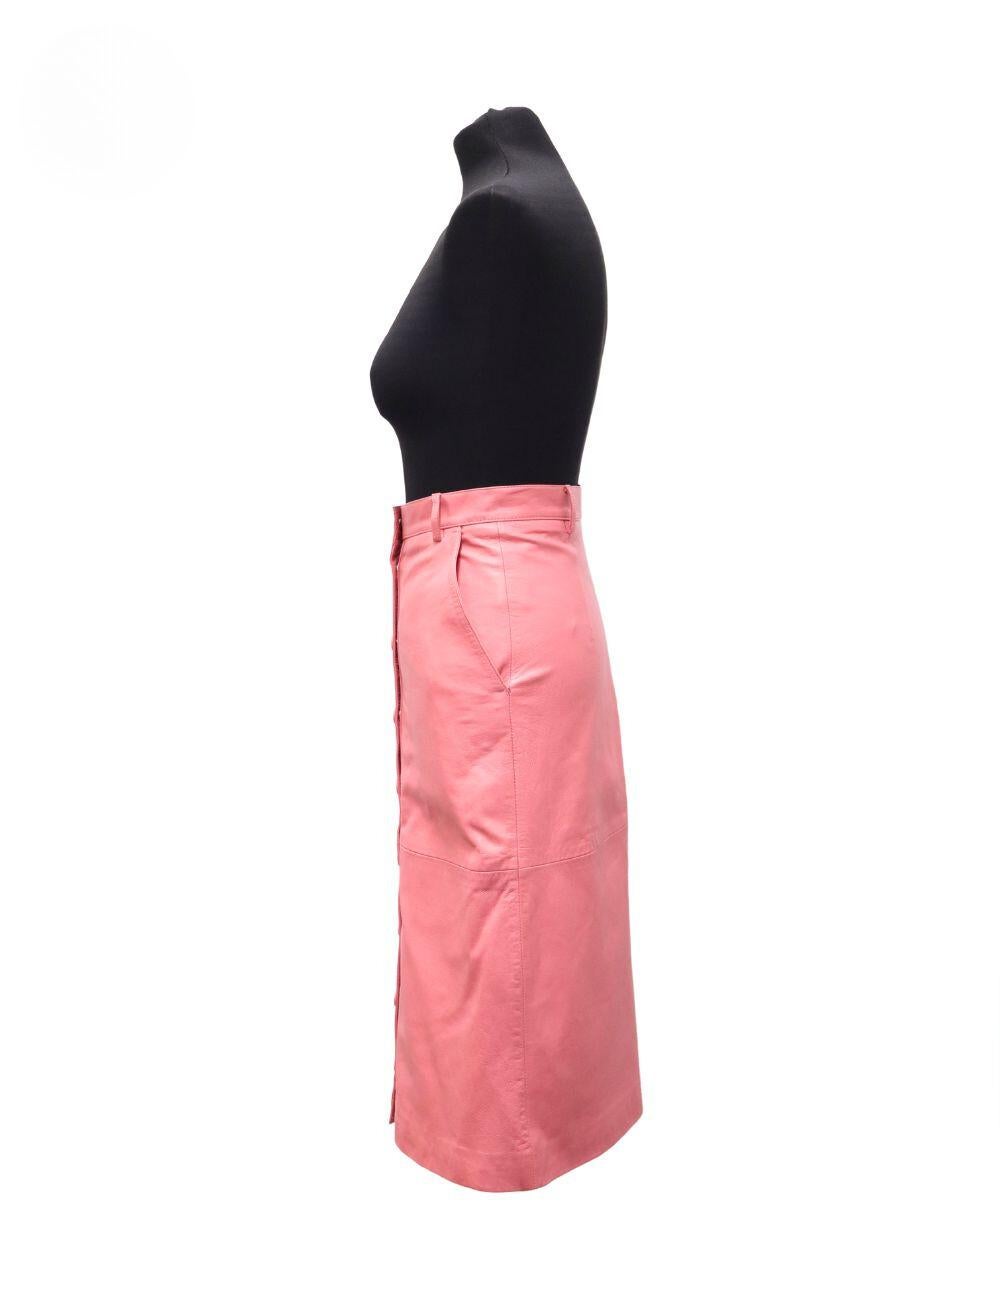 Remain Birger Christensen Bellis Leather A-Line Skirt, features a high waist, snap closure at front, slit pockets at front, and belt loops.

Material: 100% Sheep Leather
Size: EU 34 / FR 36
Waist: 68cm
Hip: 88cm
Condition: Like New